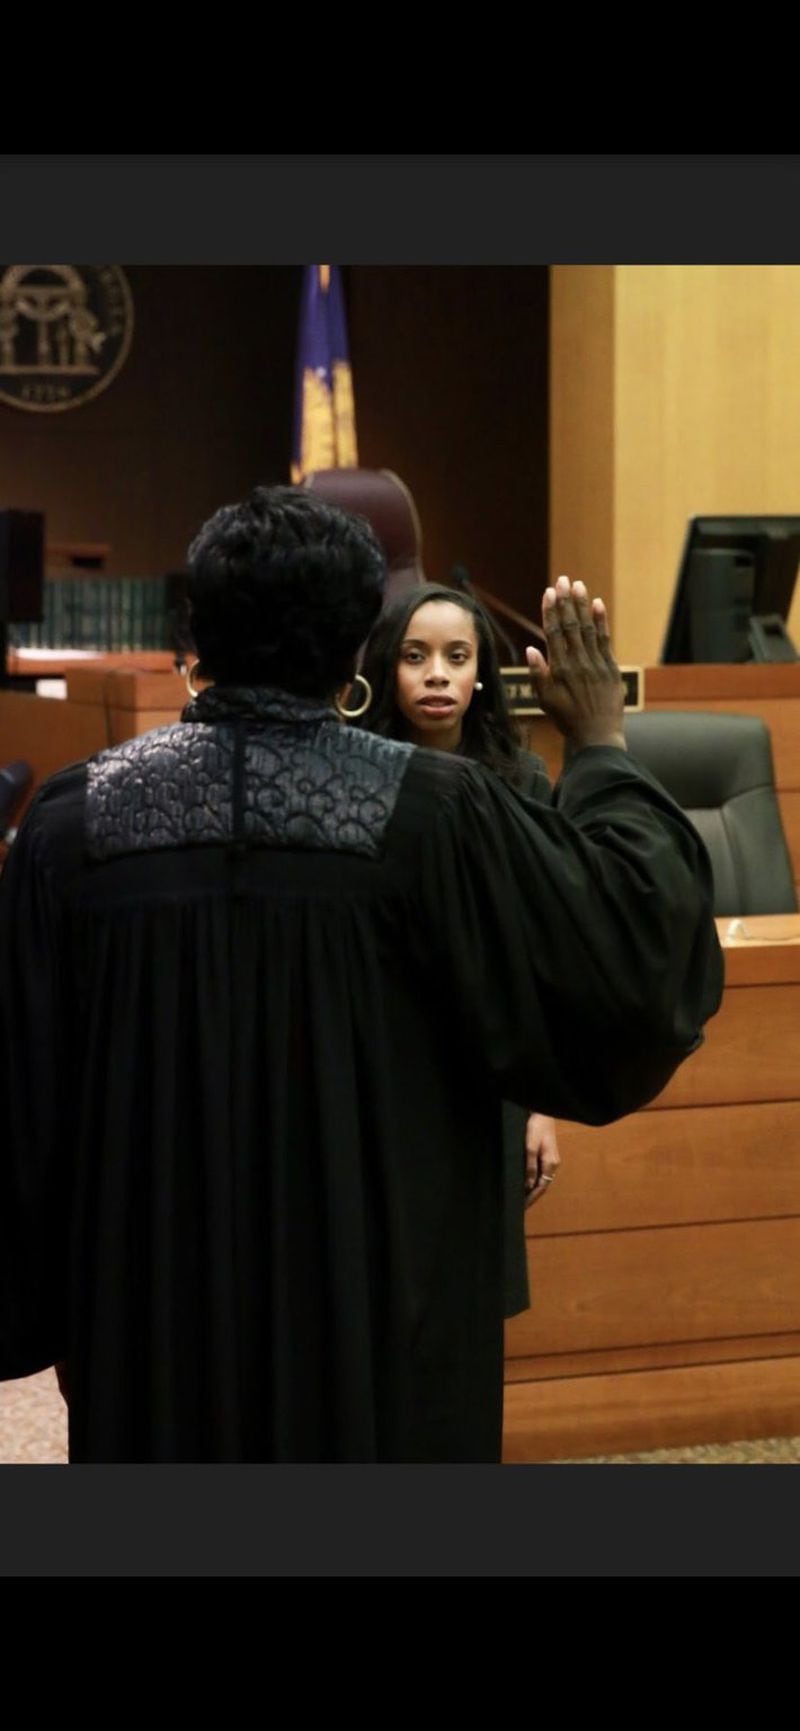 Marriah N. Paige takes the attorney oath of office during a swearing-in ceremony. CONTRIBUTED BY JORDAN BRADLEY